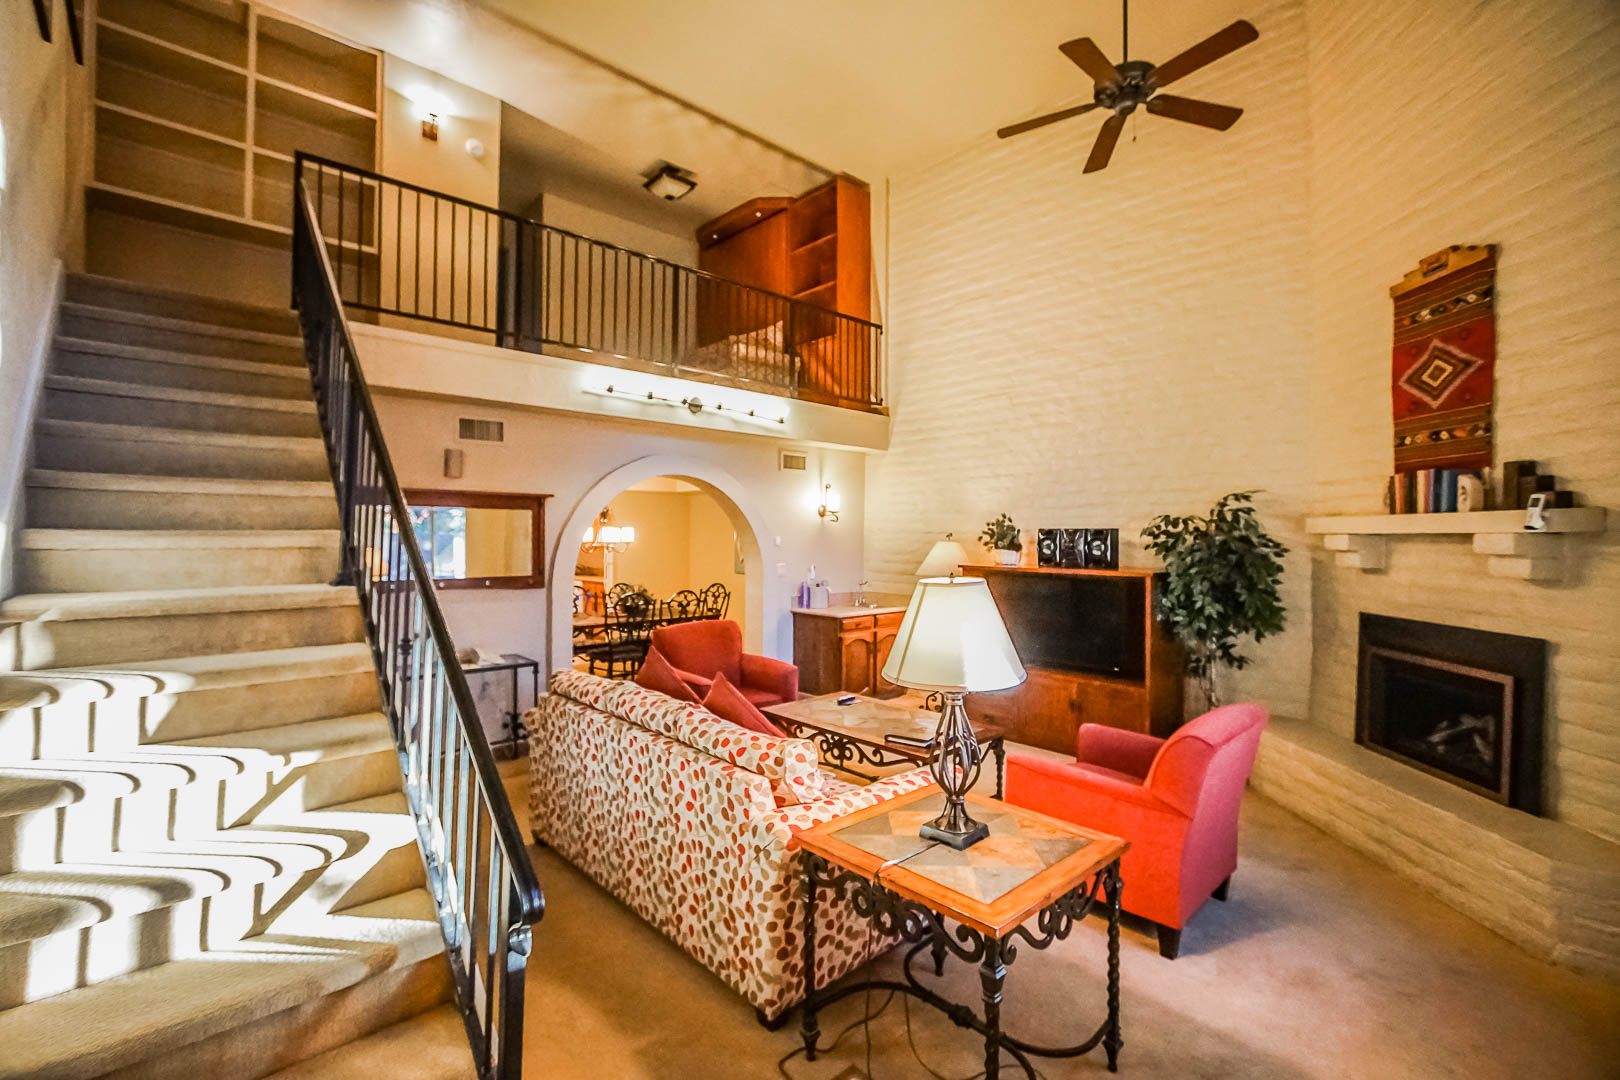 A vibrant living room, and a view of the upstairs bedroom at VRI's Villas of Sedona in Arizona.